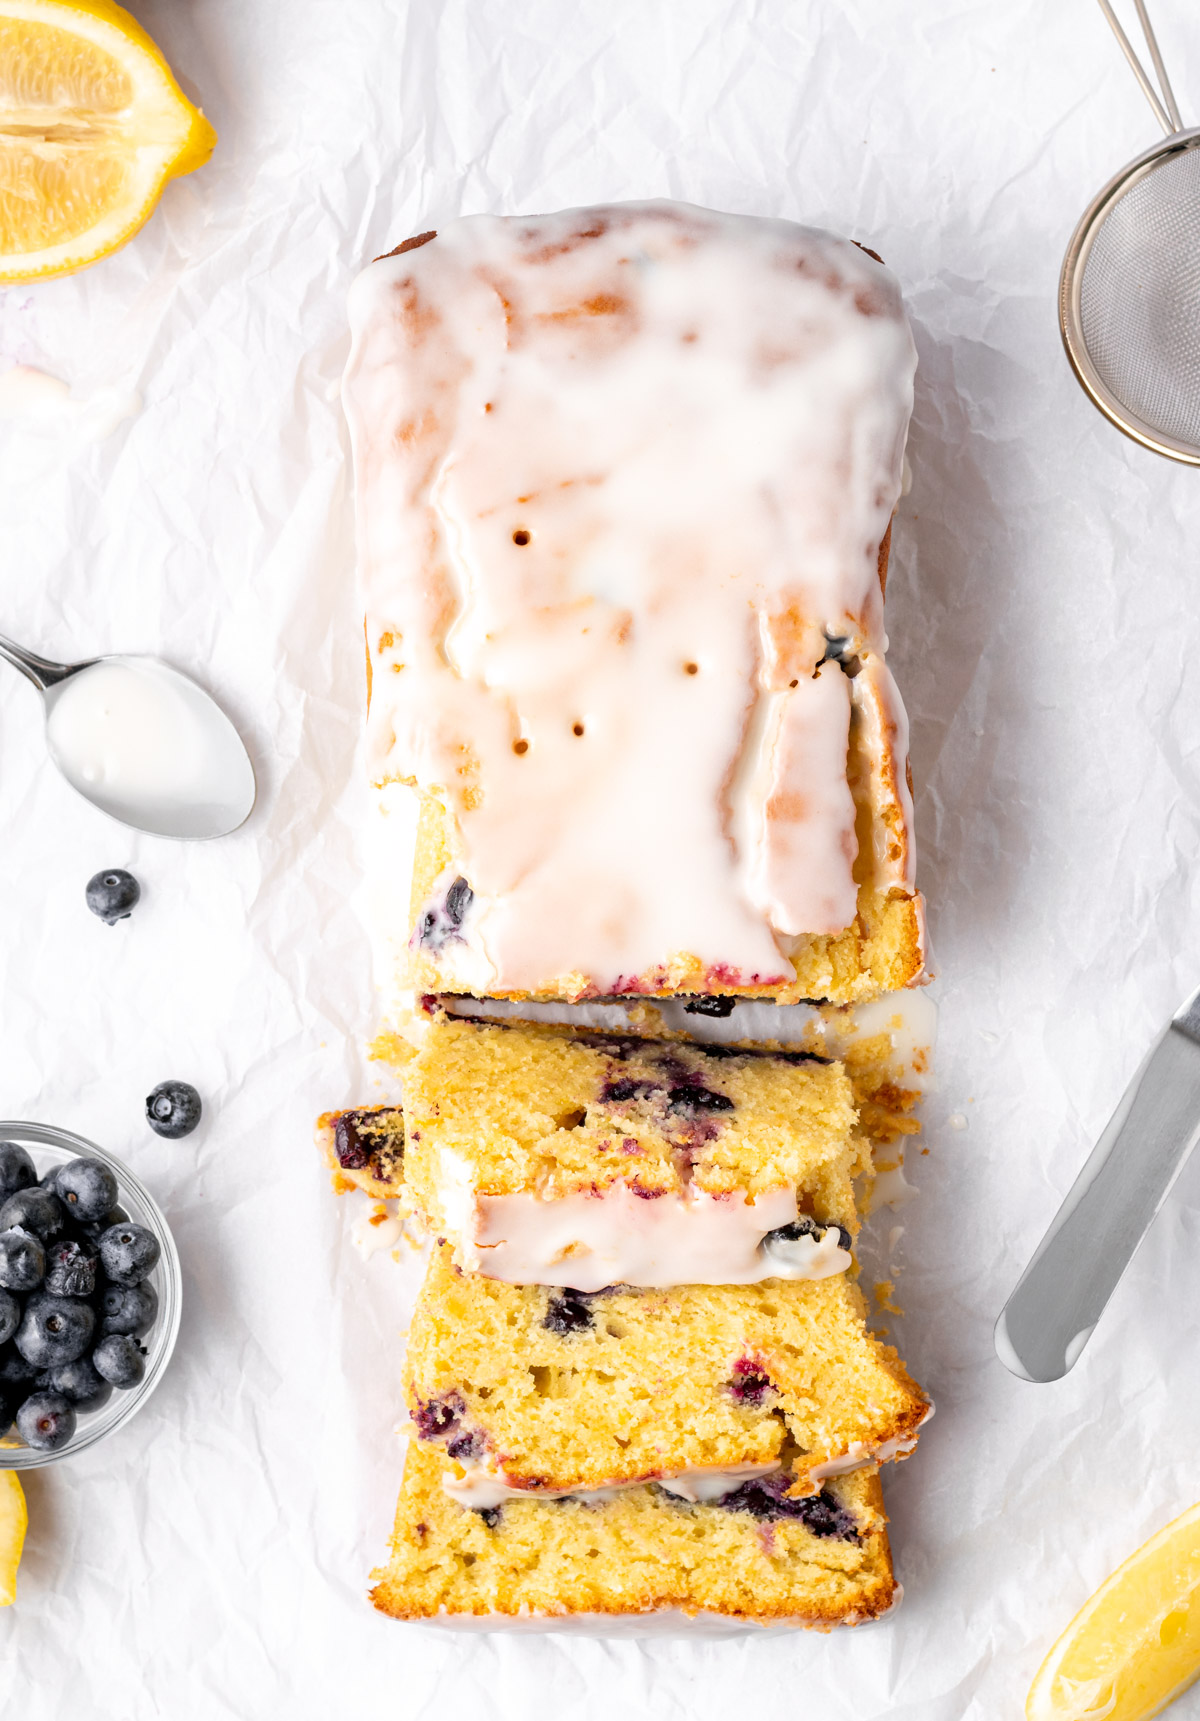 top view of a gluten free lemon blueberry loaf with 3 slices